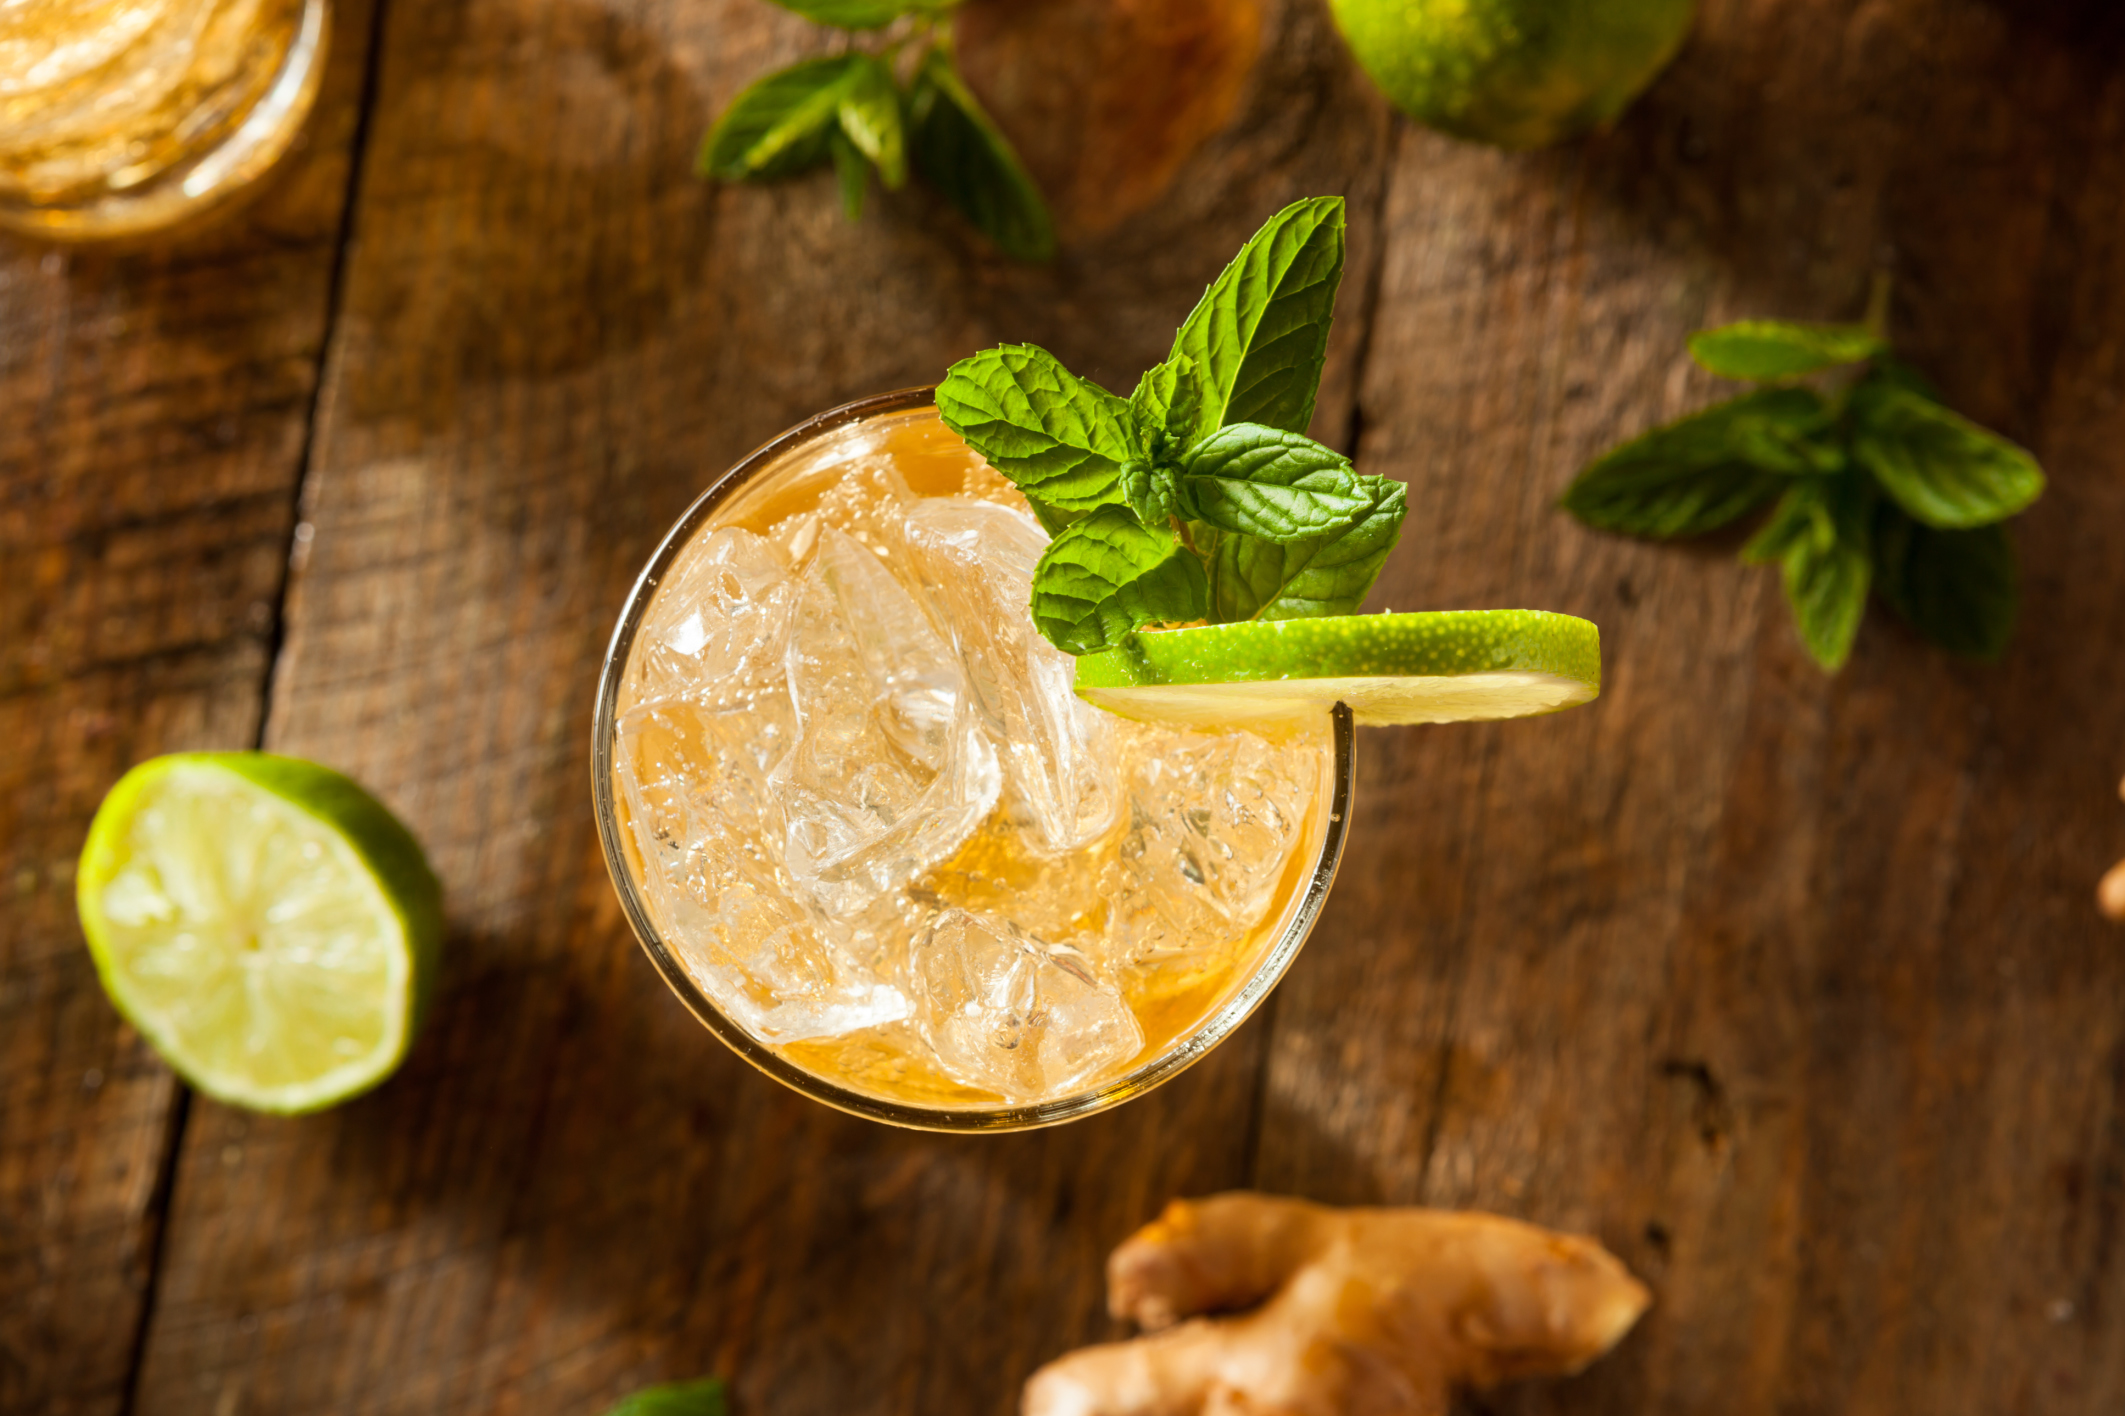 Ginger Ale vs Ginger Beer - What's the Difference Between Ginger Beer and Ginger  Ale?